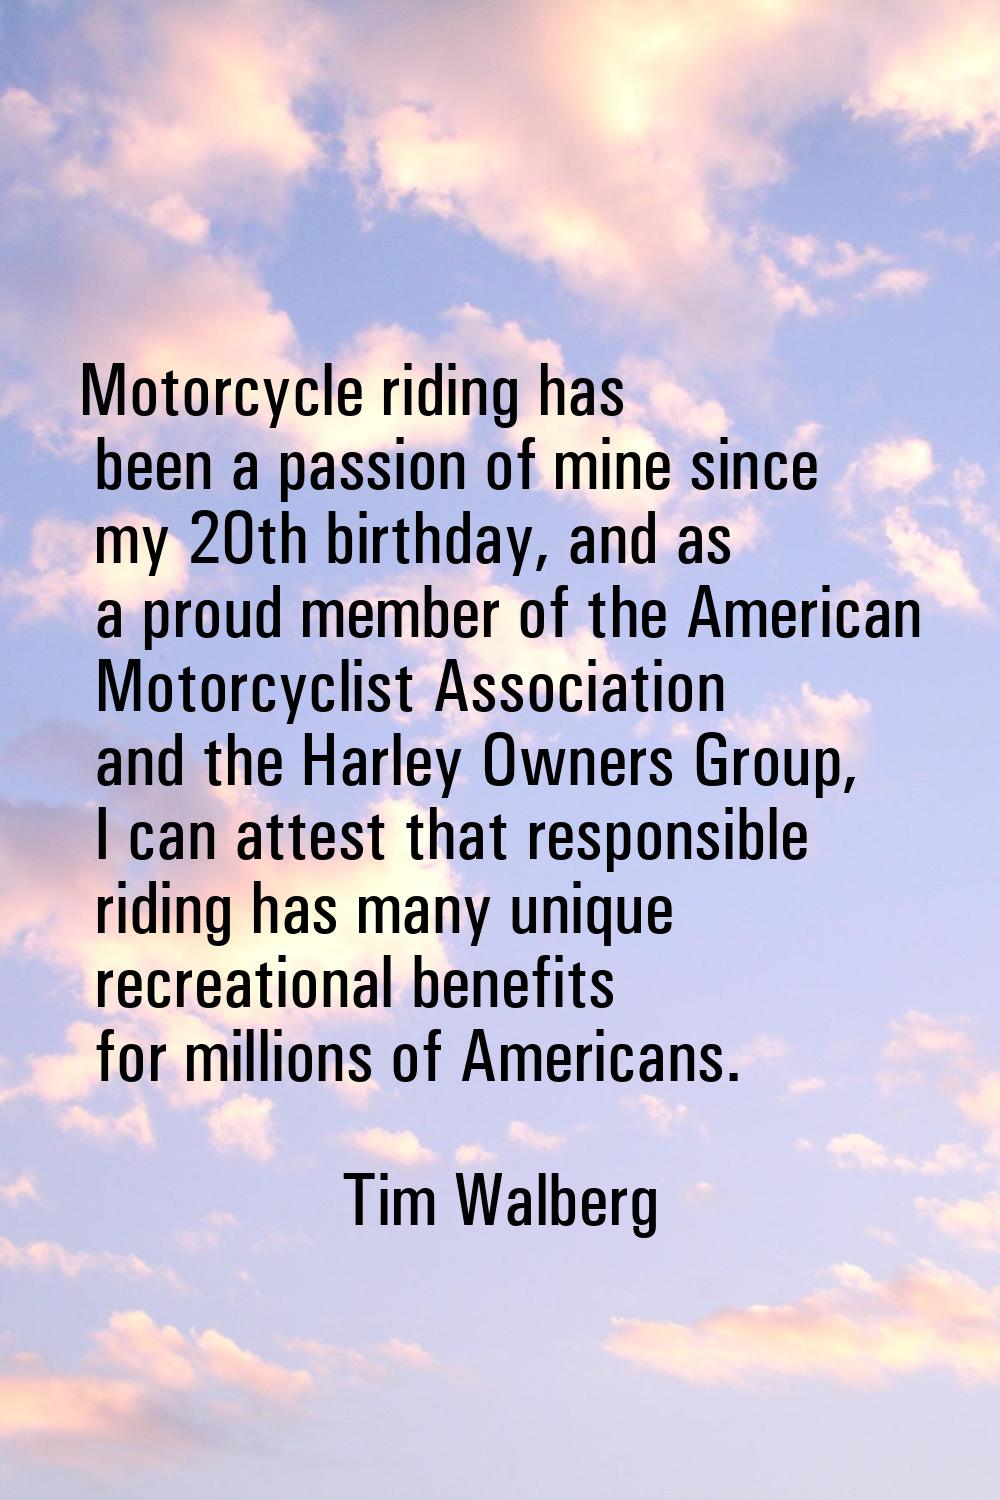 Motorcycle riding has been a passion of mine since my 20th birthday, and as a proud member of the A